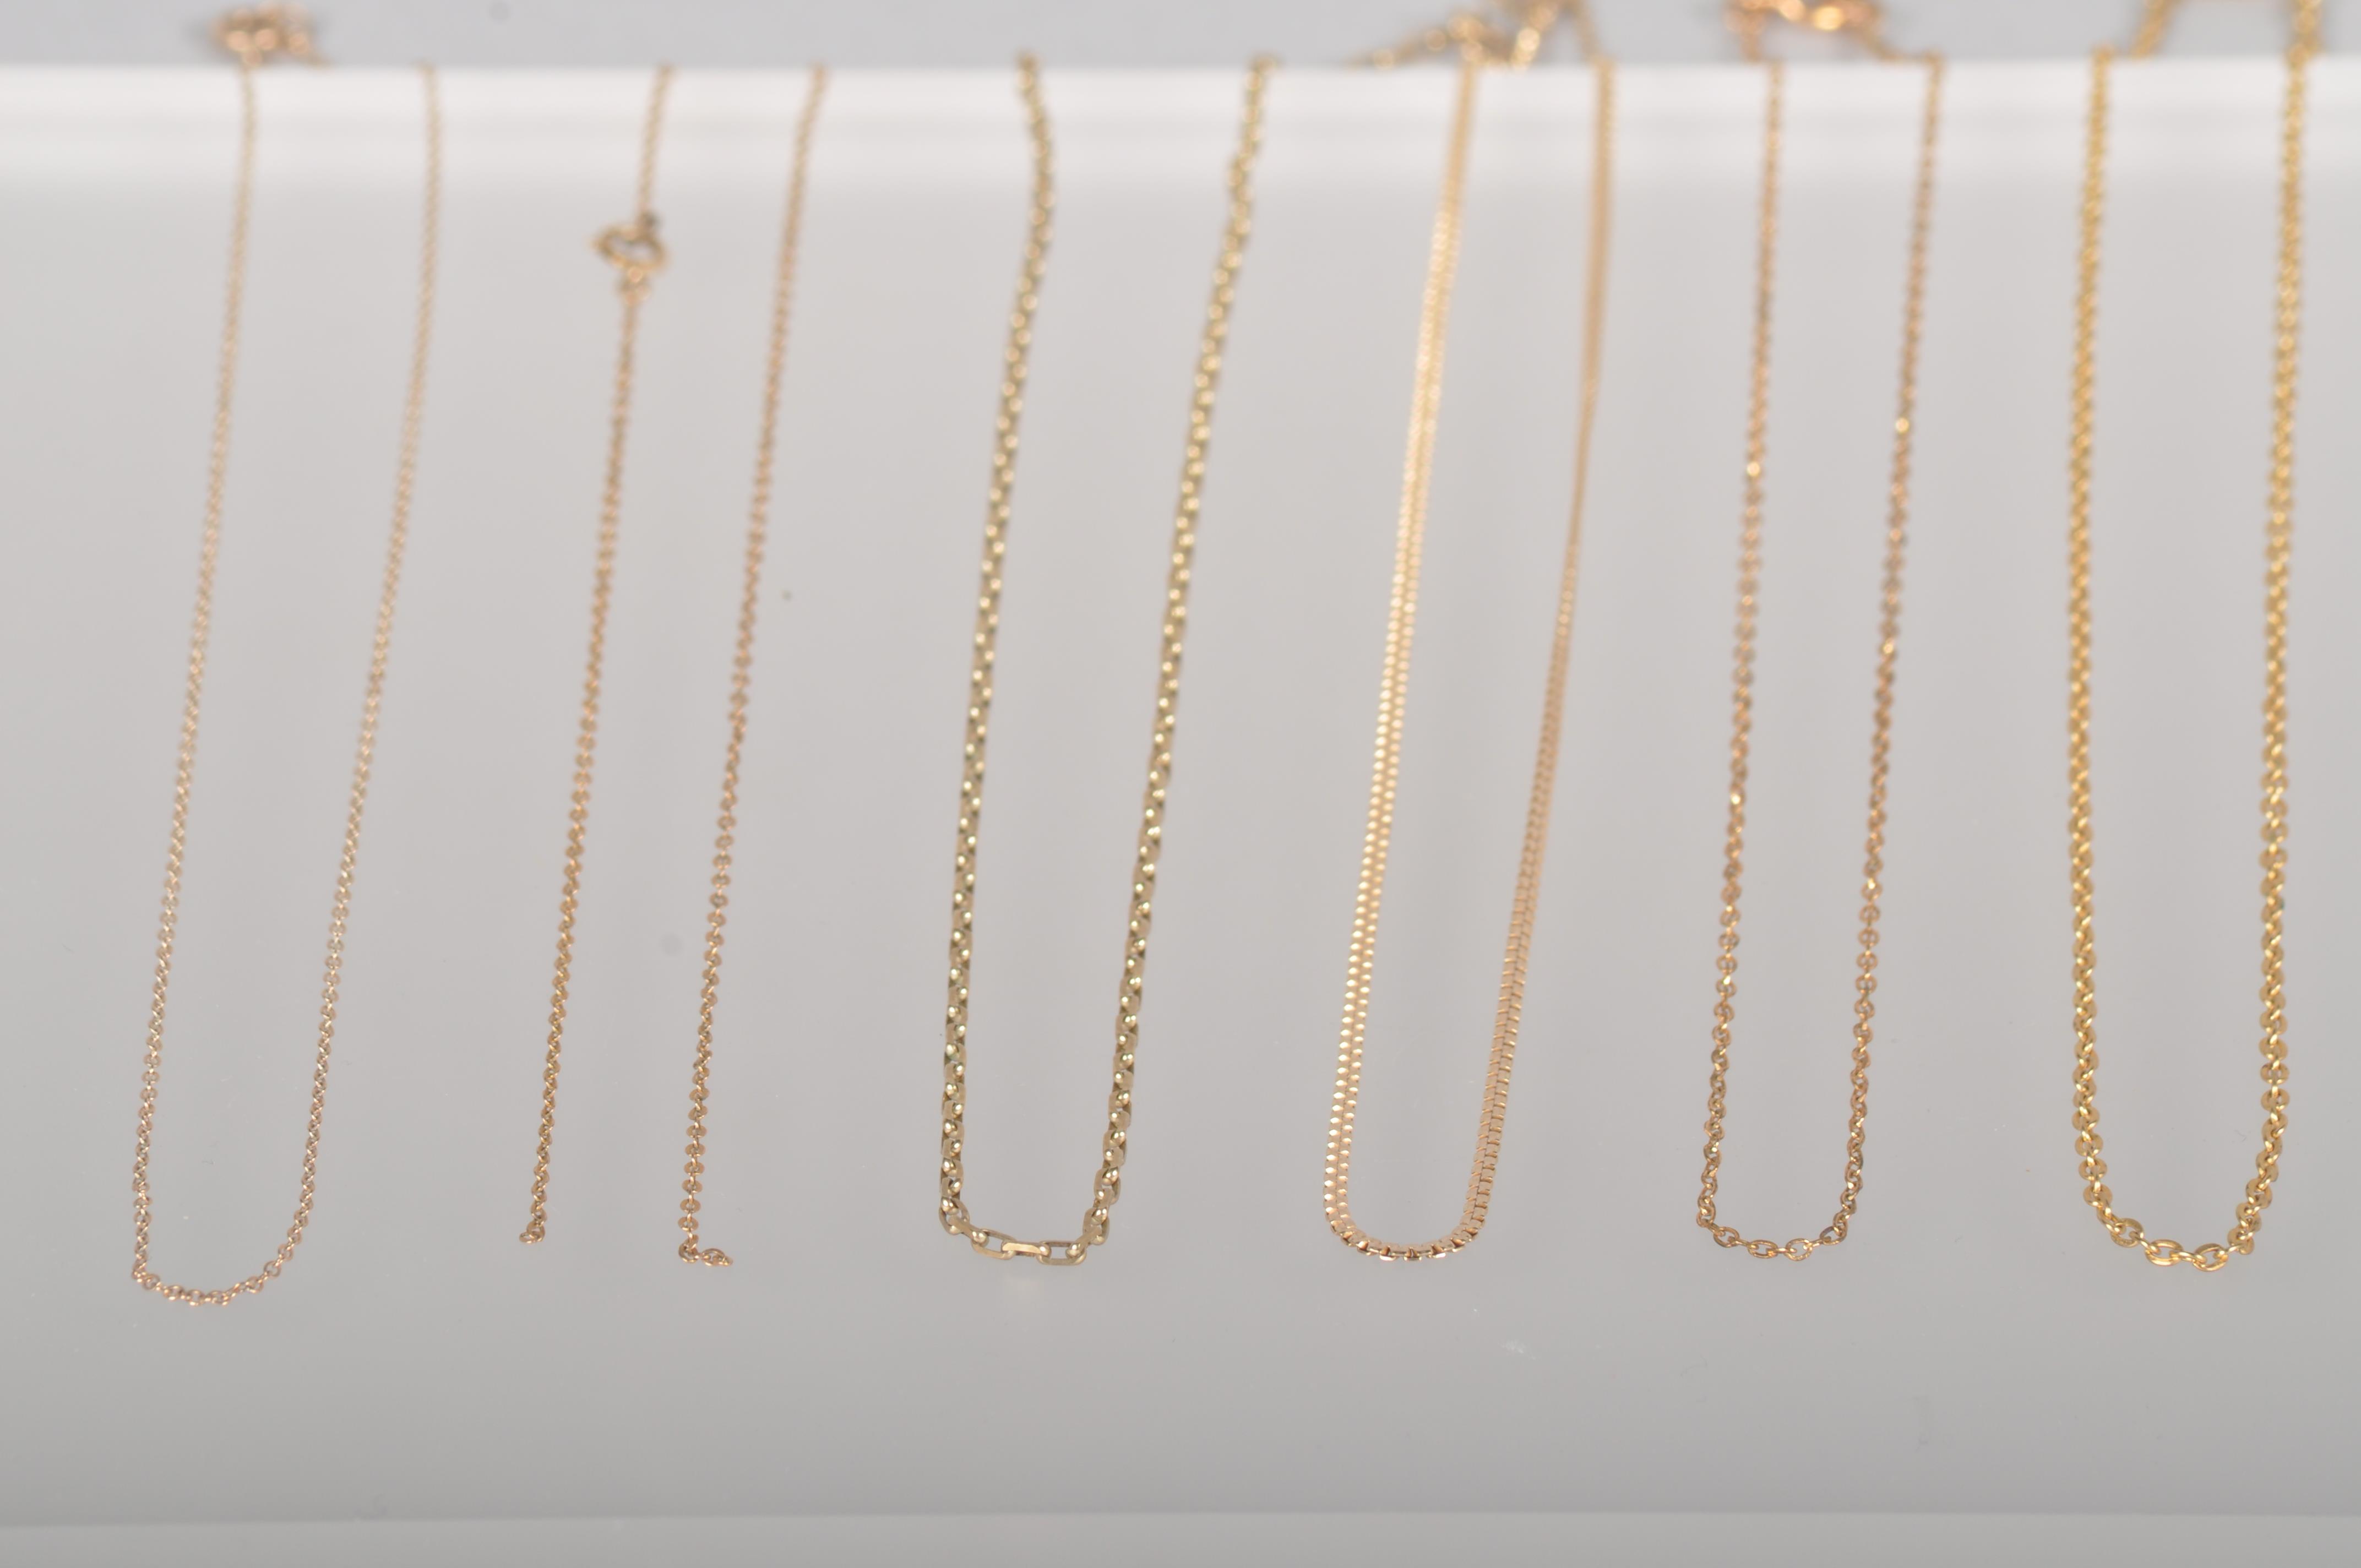 A collection of six yellow metal linked necklace chains.